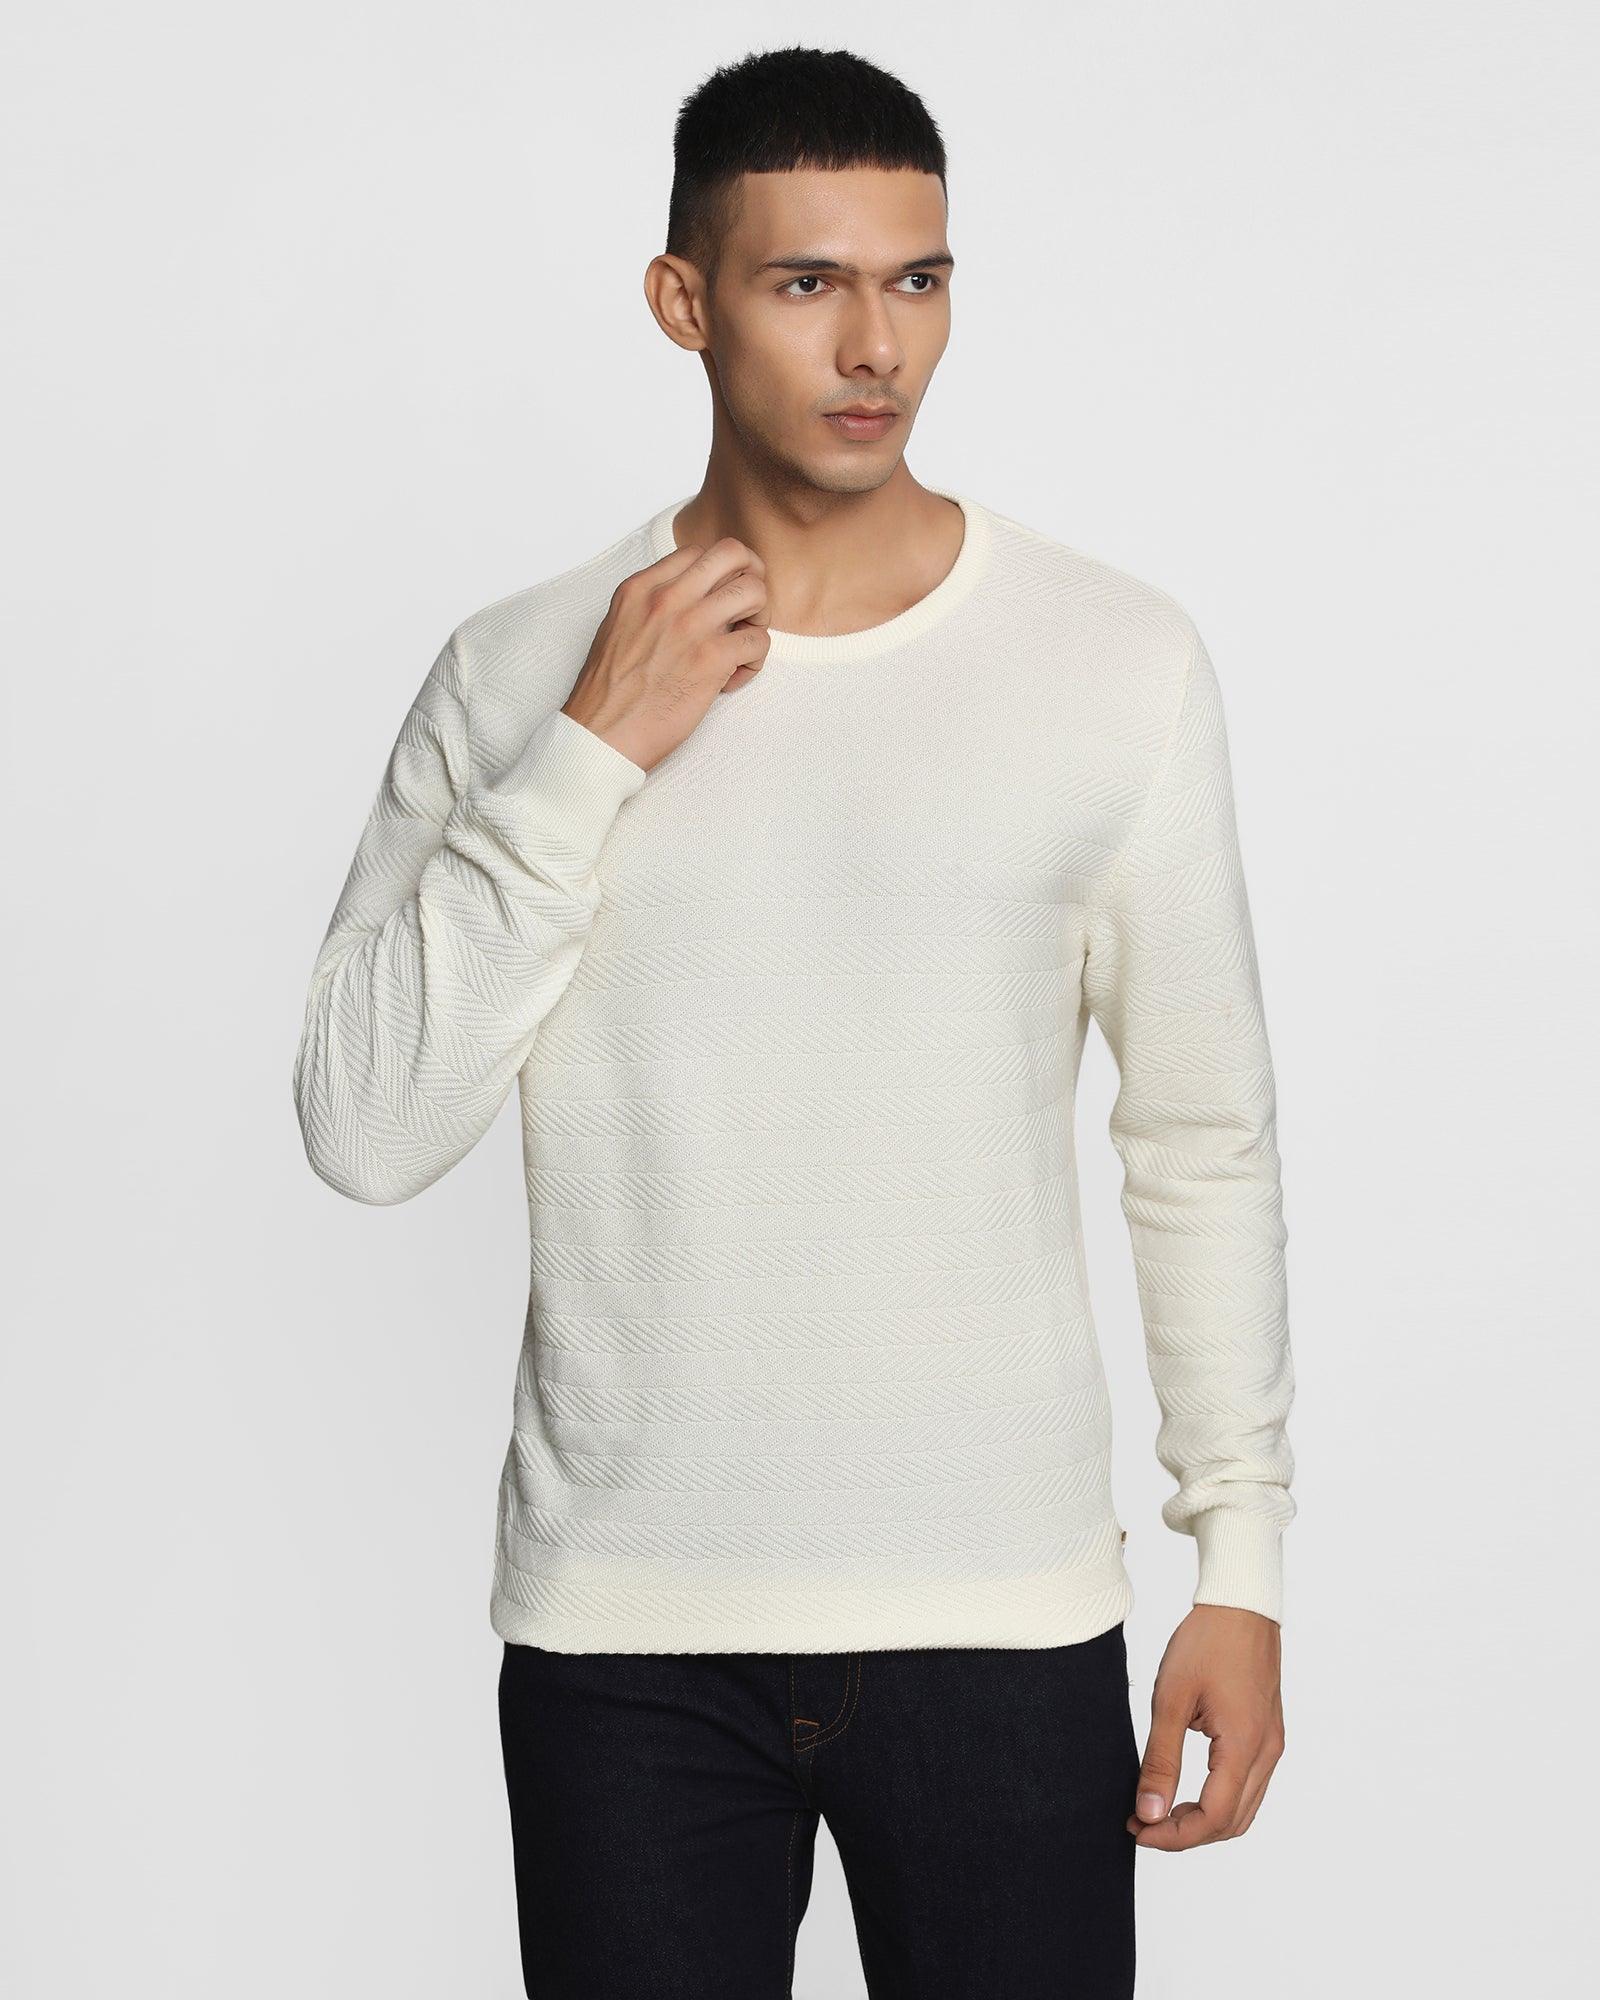 crew neck off white textured sweater - ethan